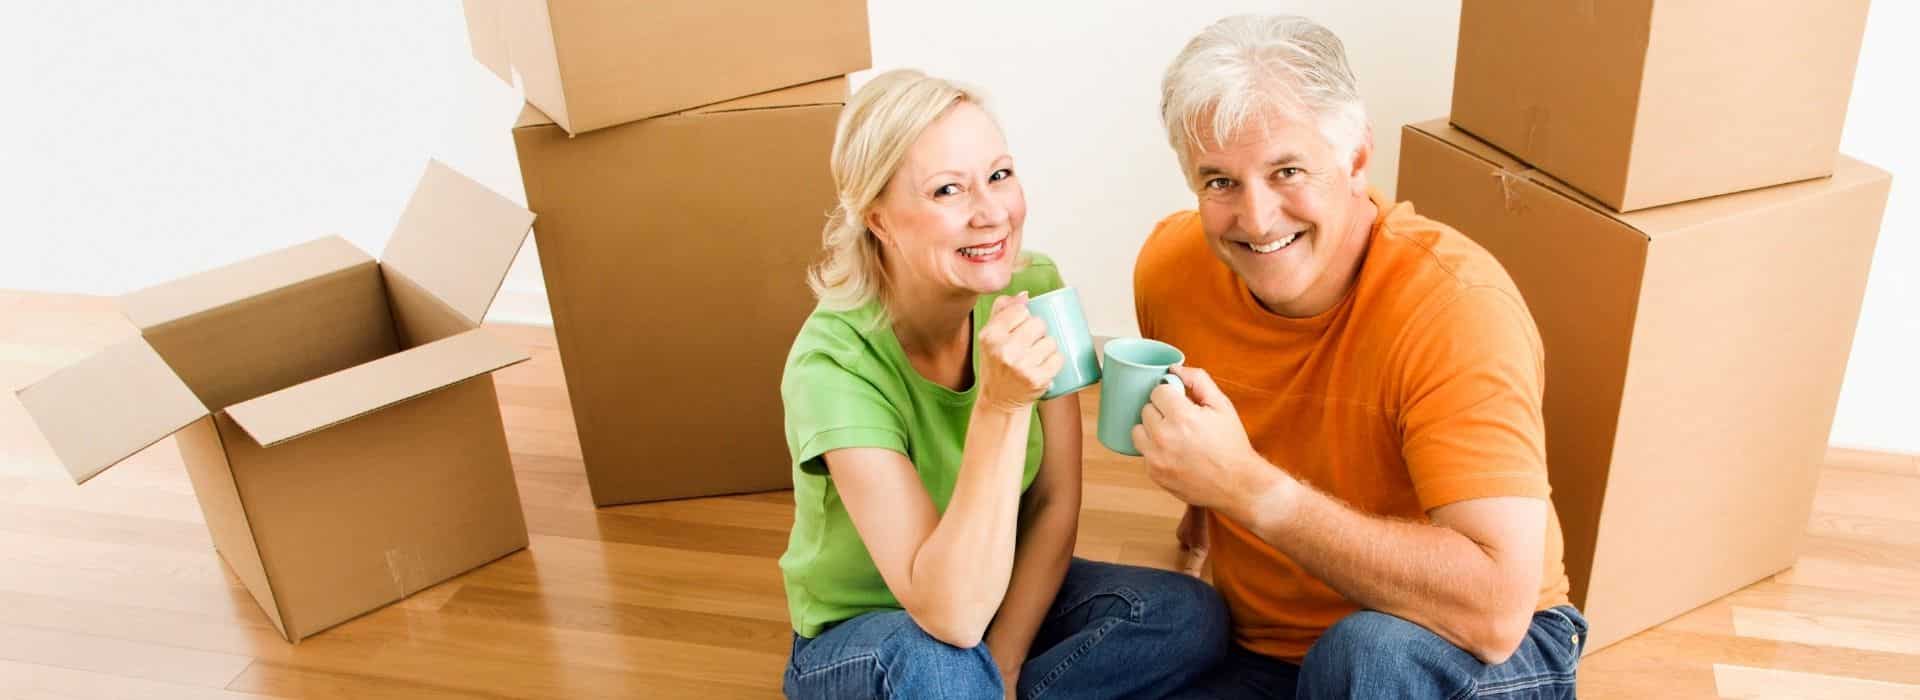 How to Choose the Best Moving Services for Local Moves?